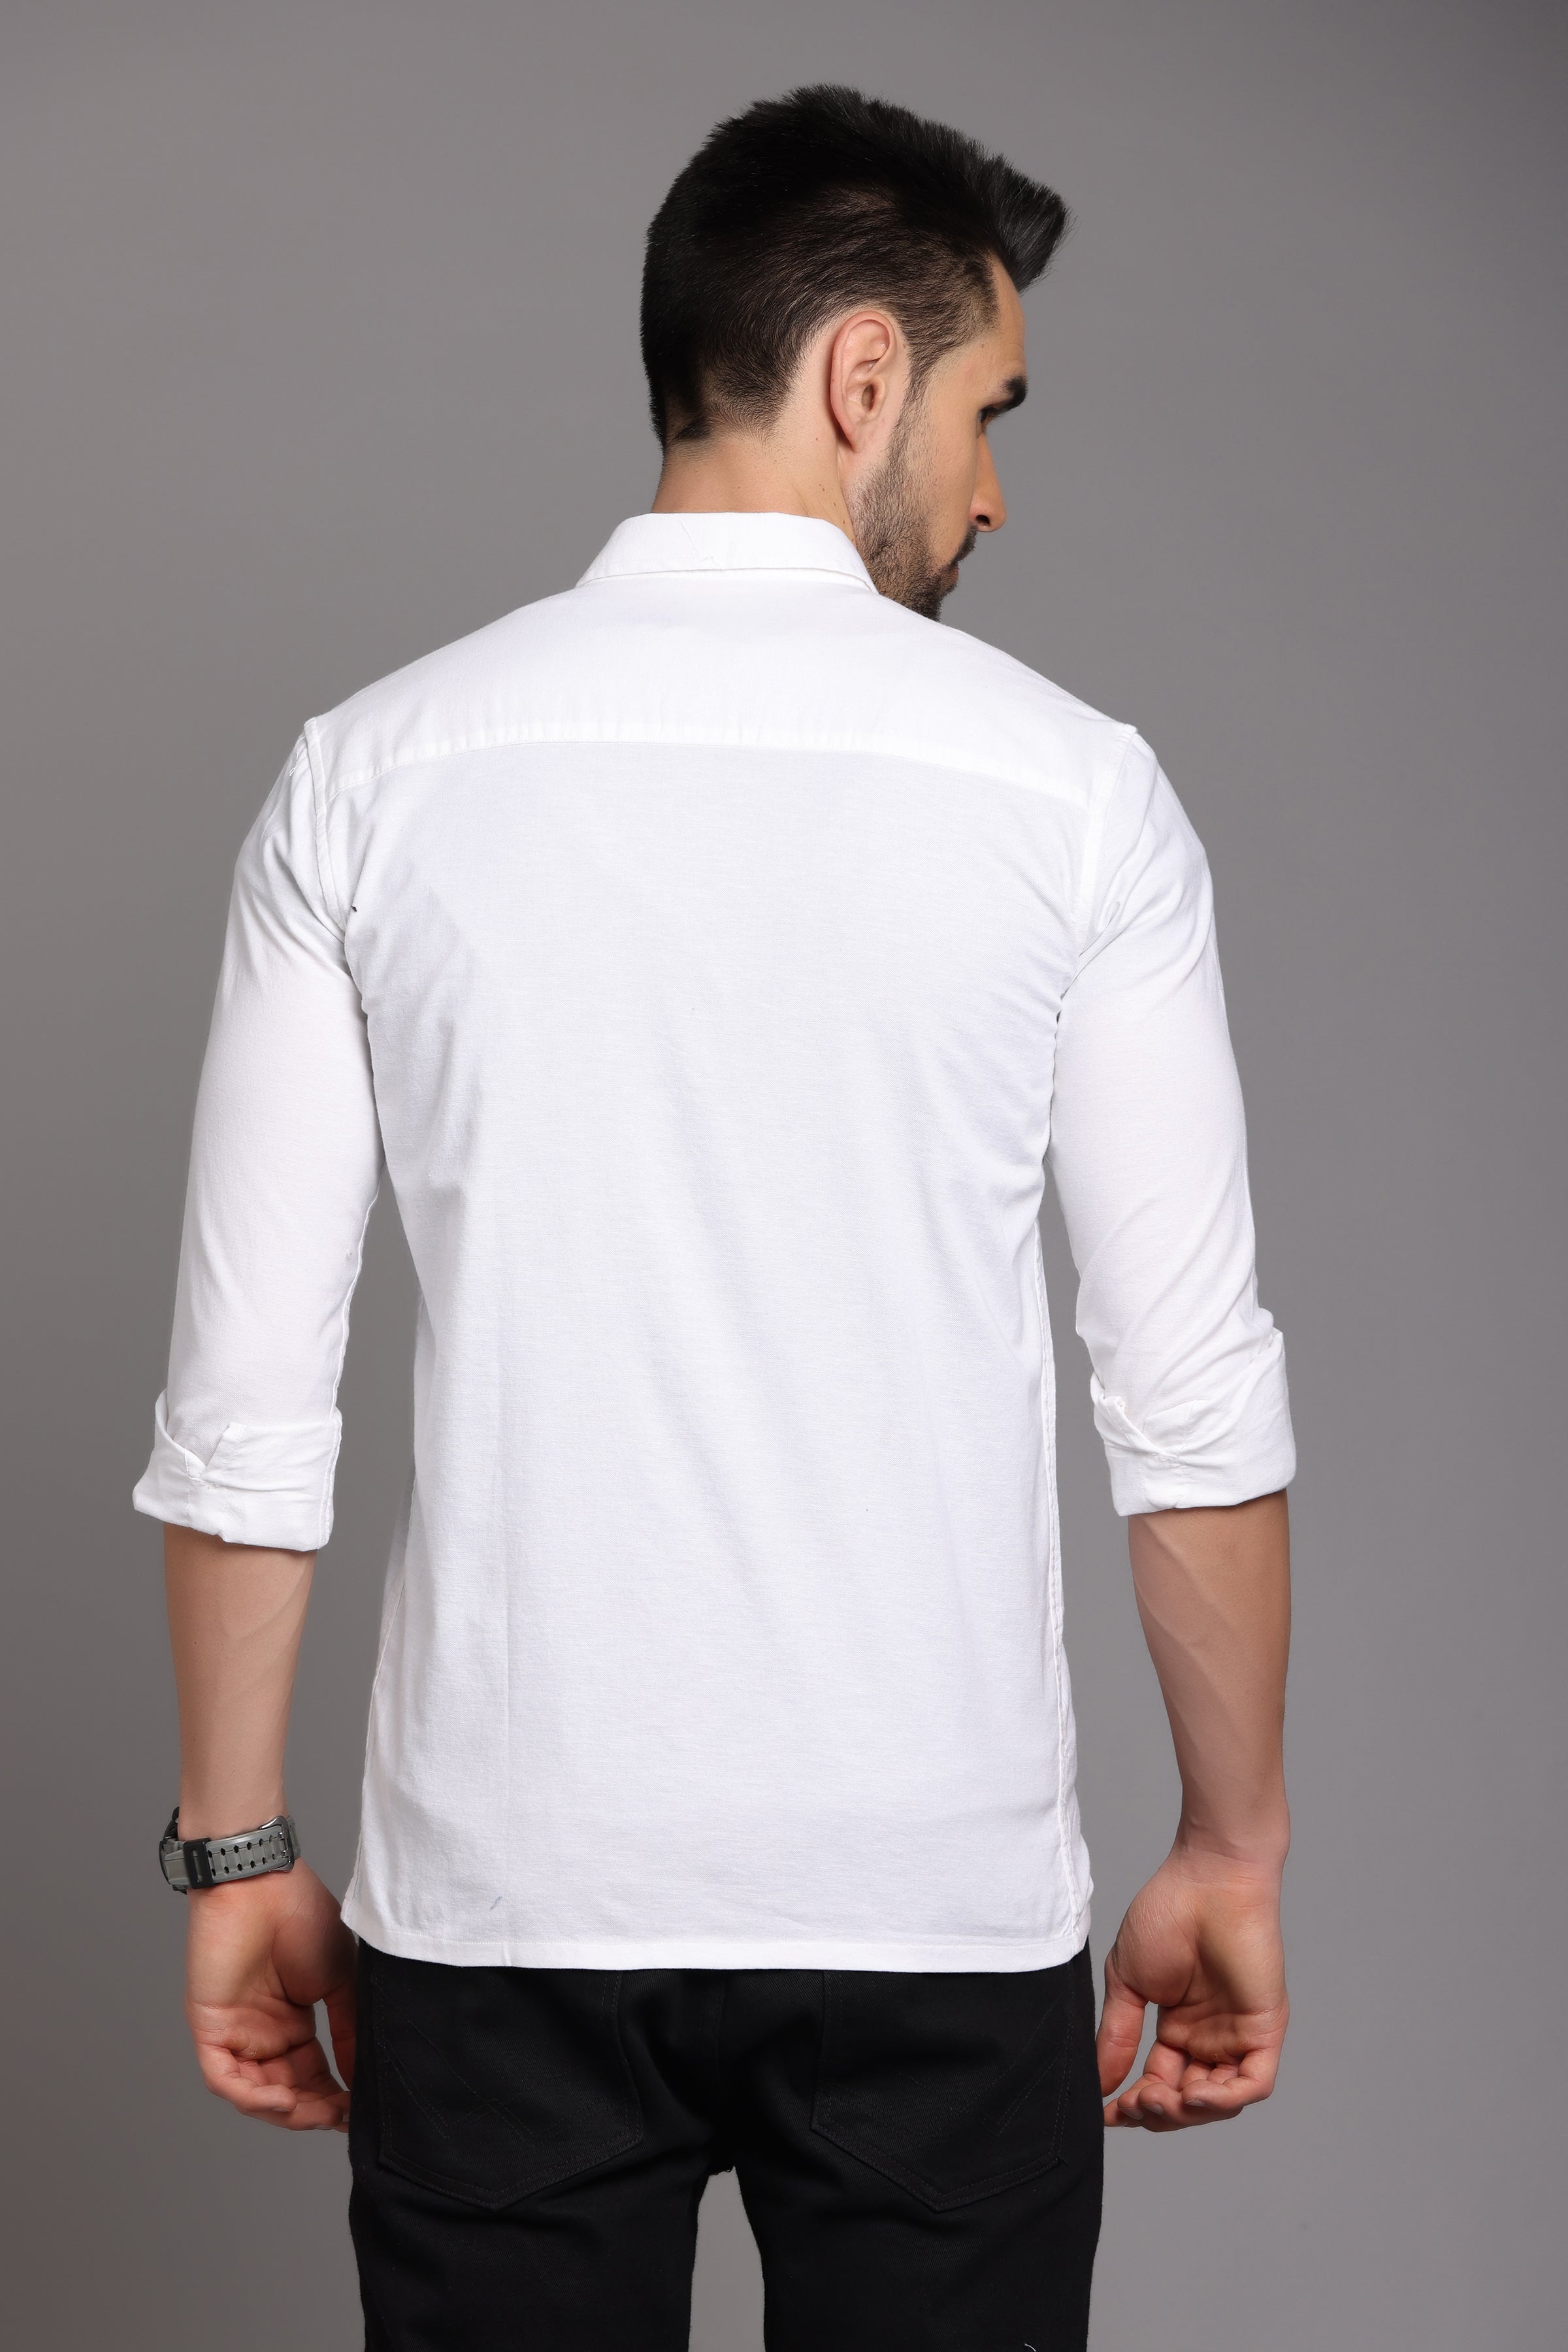 White Full Sleeve Shirt with Double Pocket Shirts Project 30 